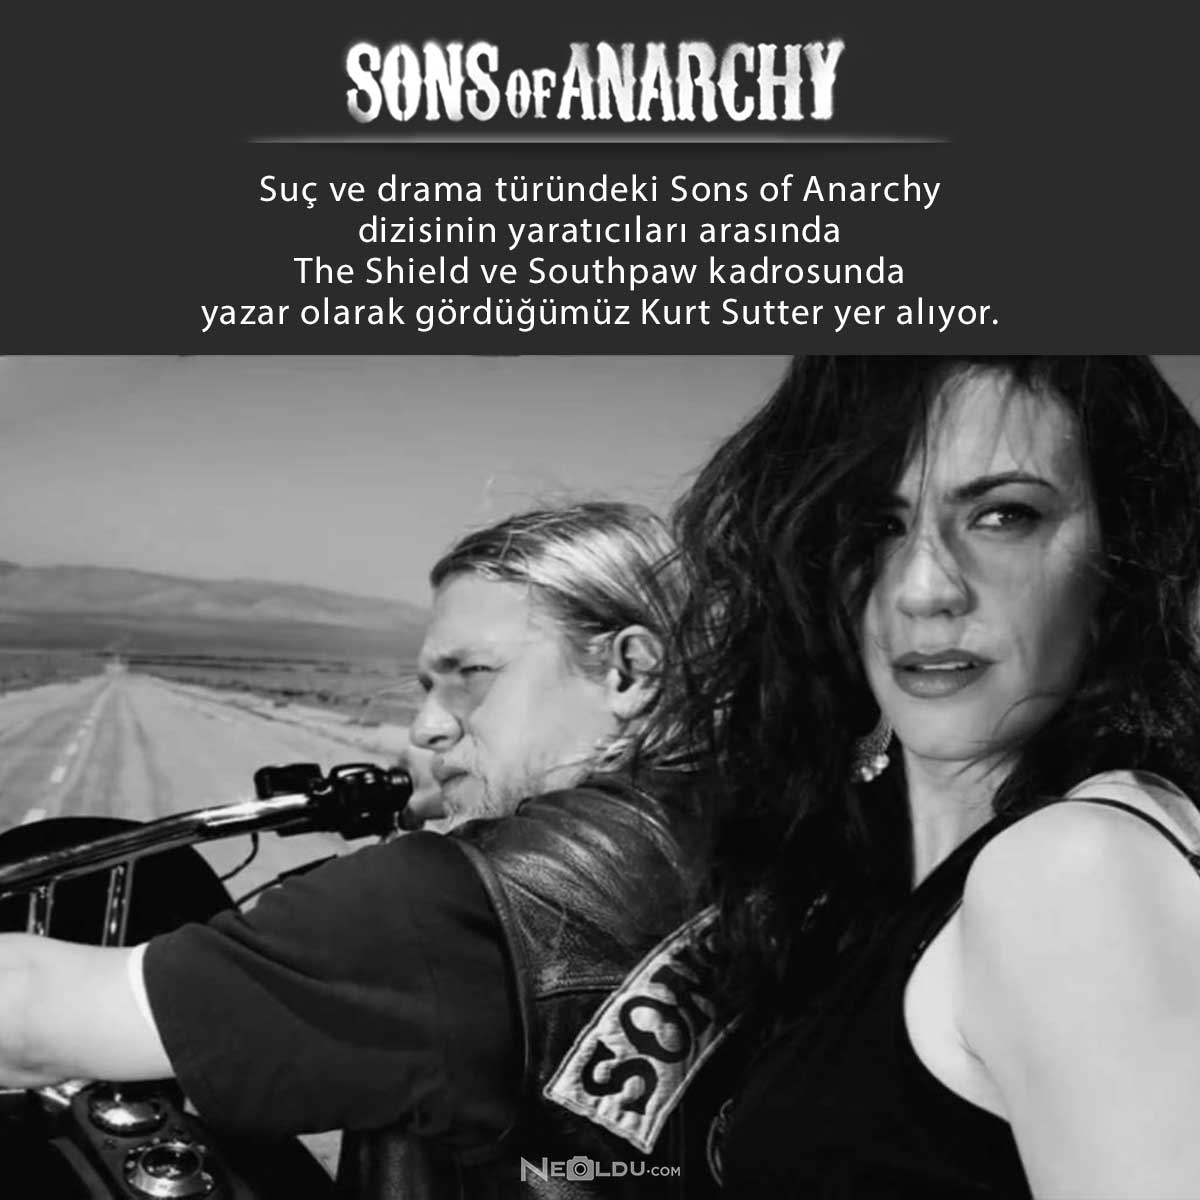 sons-of-anarchy dizisi-.jpg